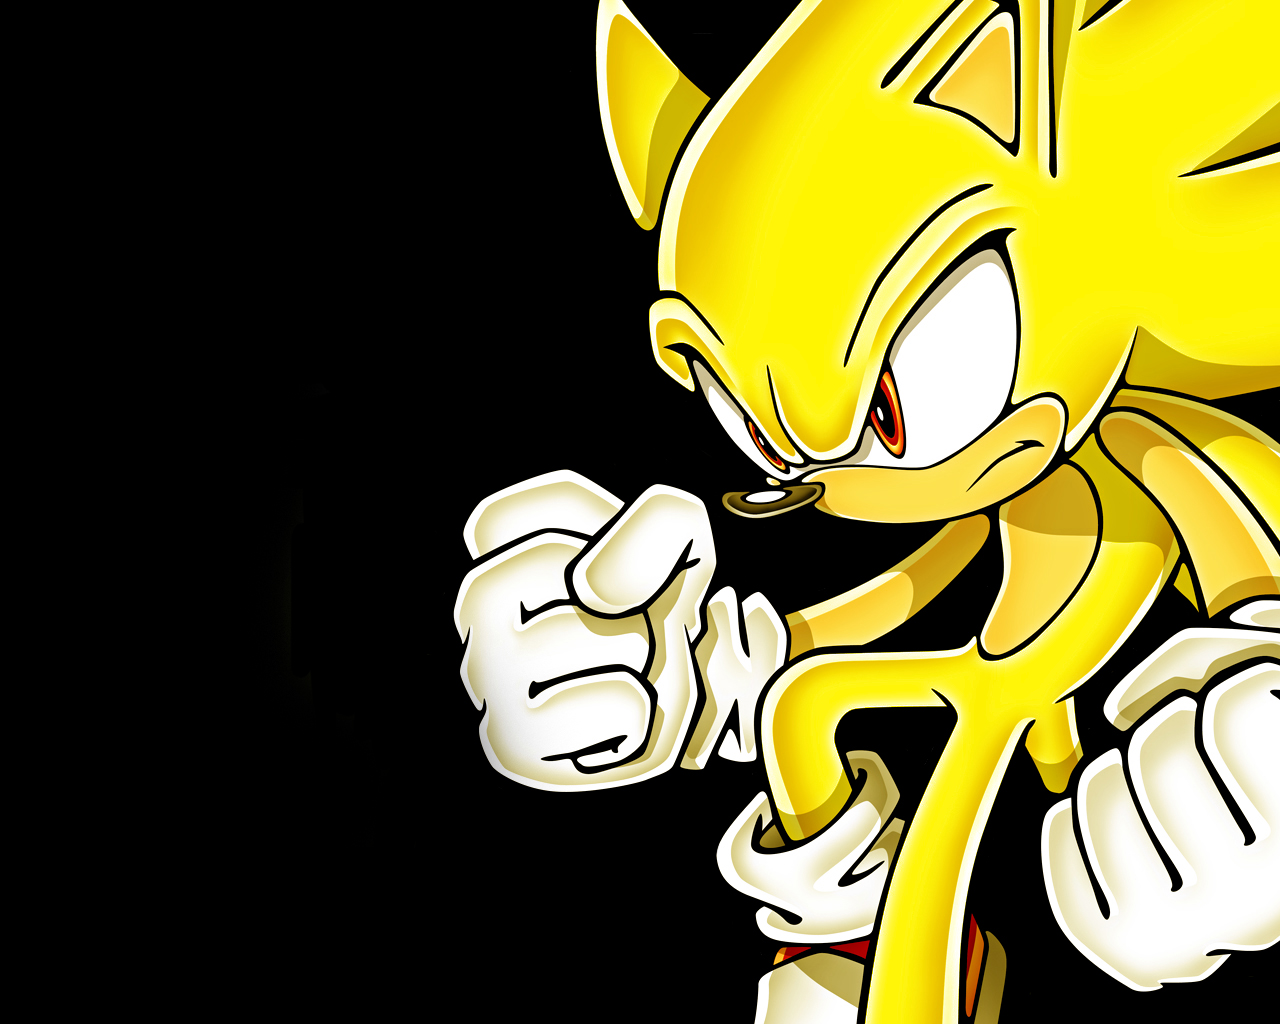  Name 891488 Sonic The Hedgehog Wallpaper for PC Full HD Pictures